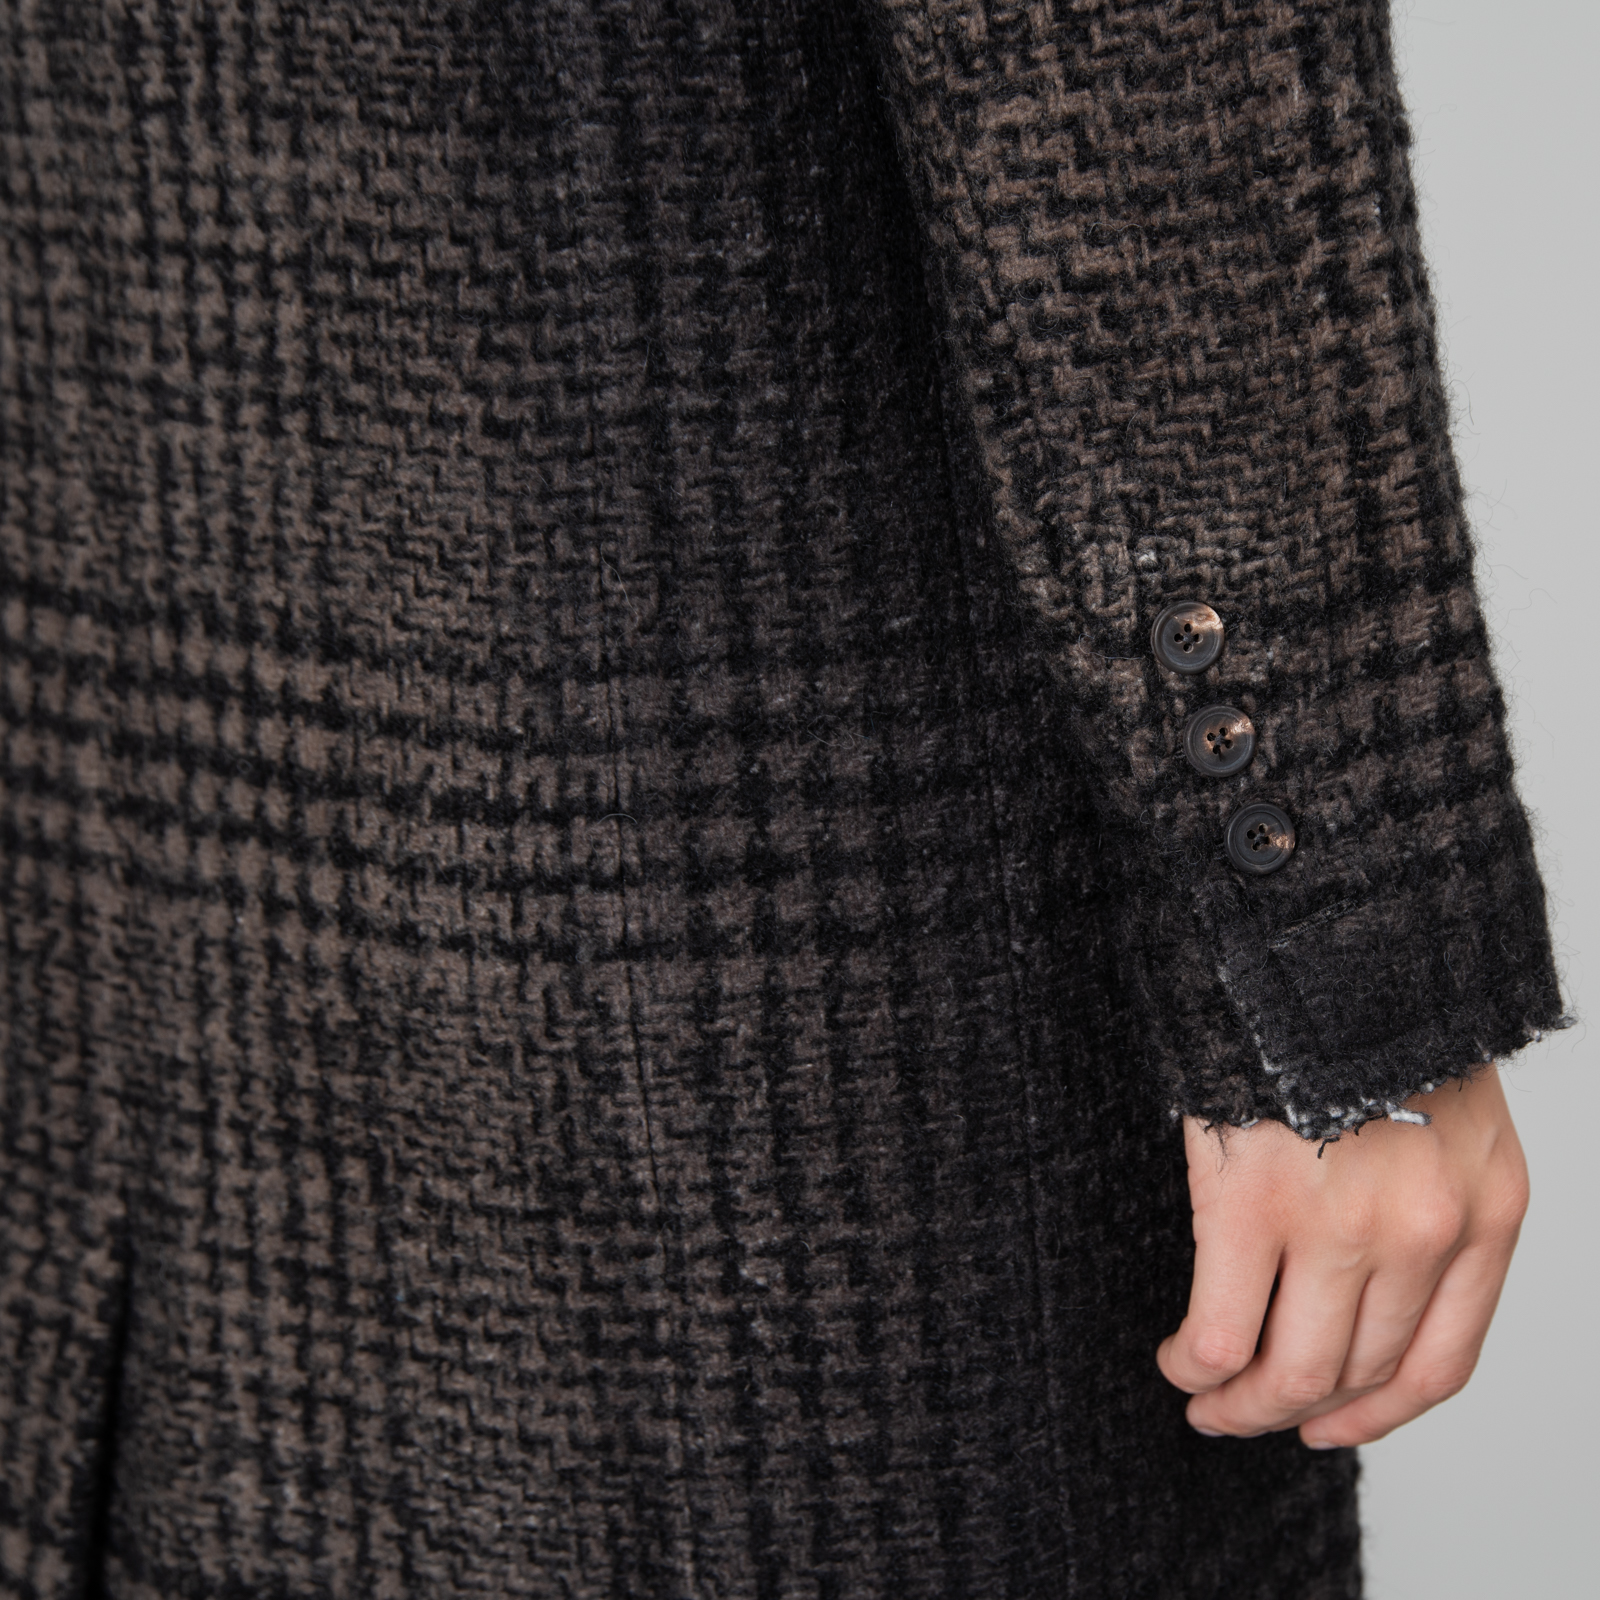 TAUPE CHECK WOOL COAT|wolfensson